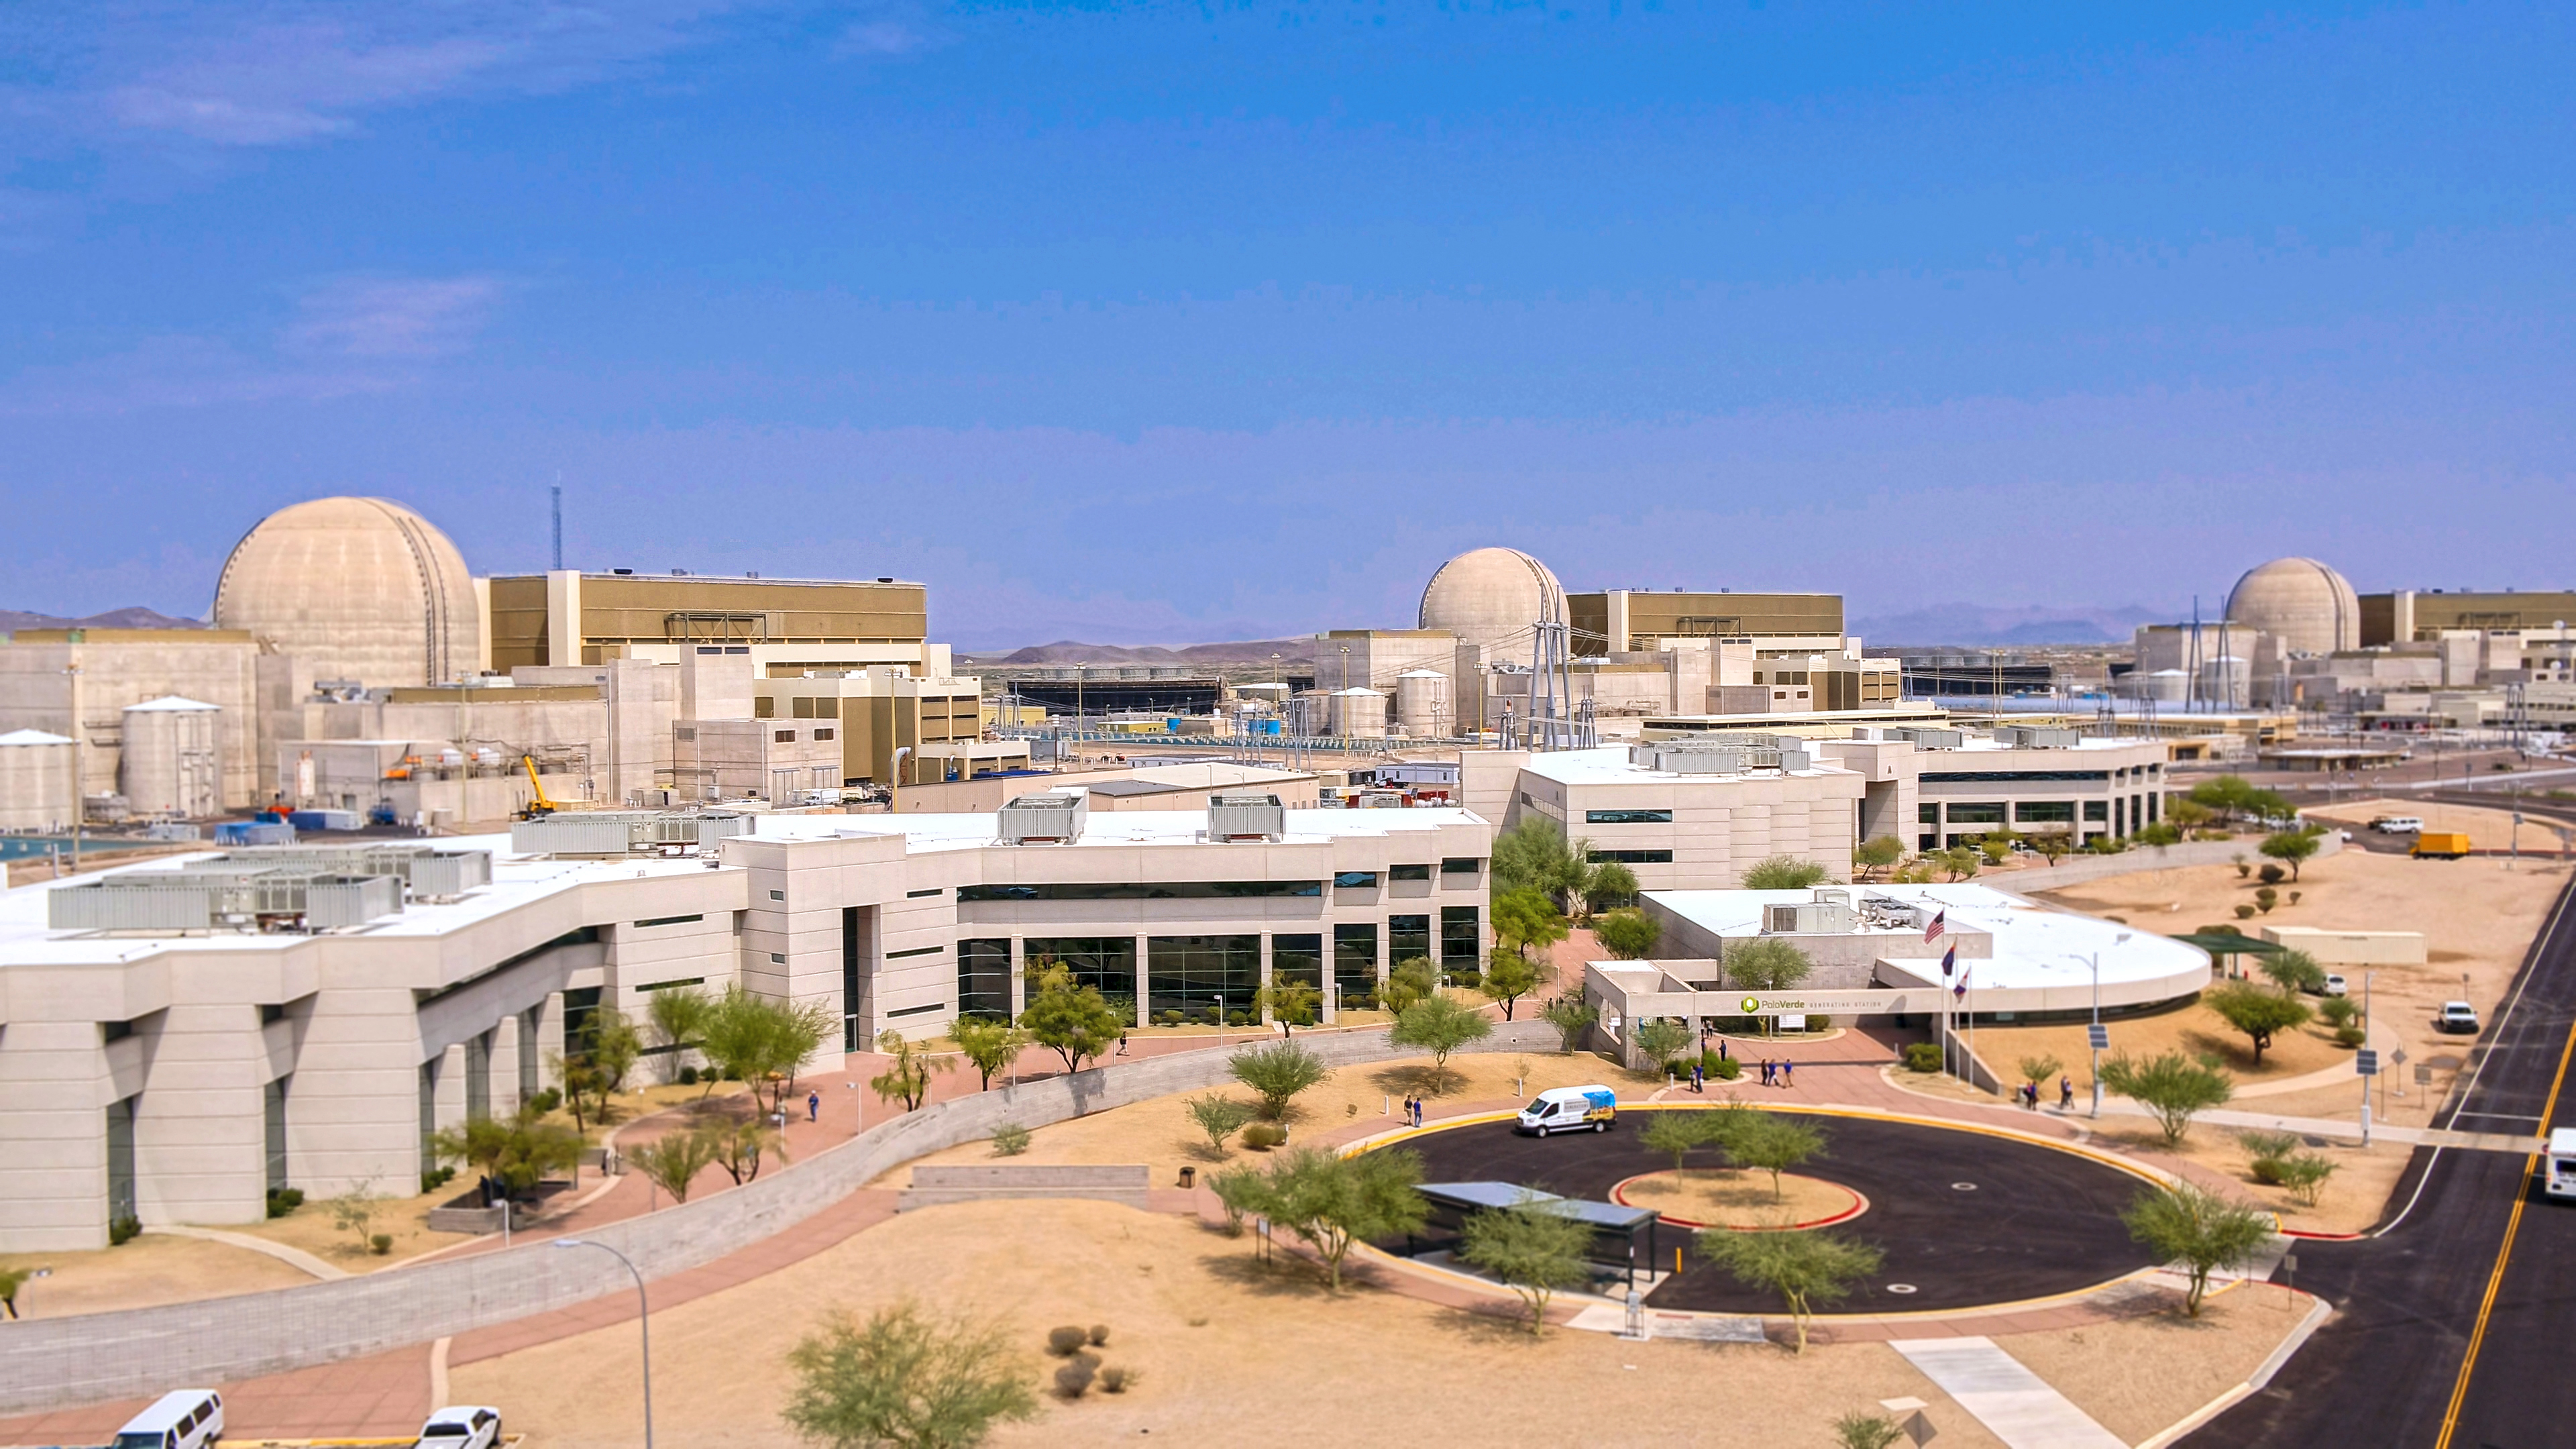 Aerial view of the Palo Verde Generating Station entrance 